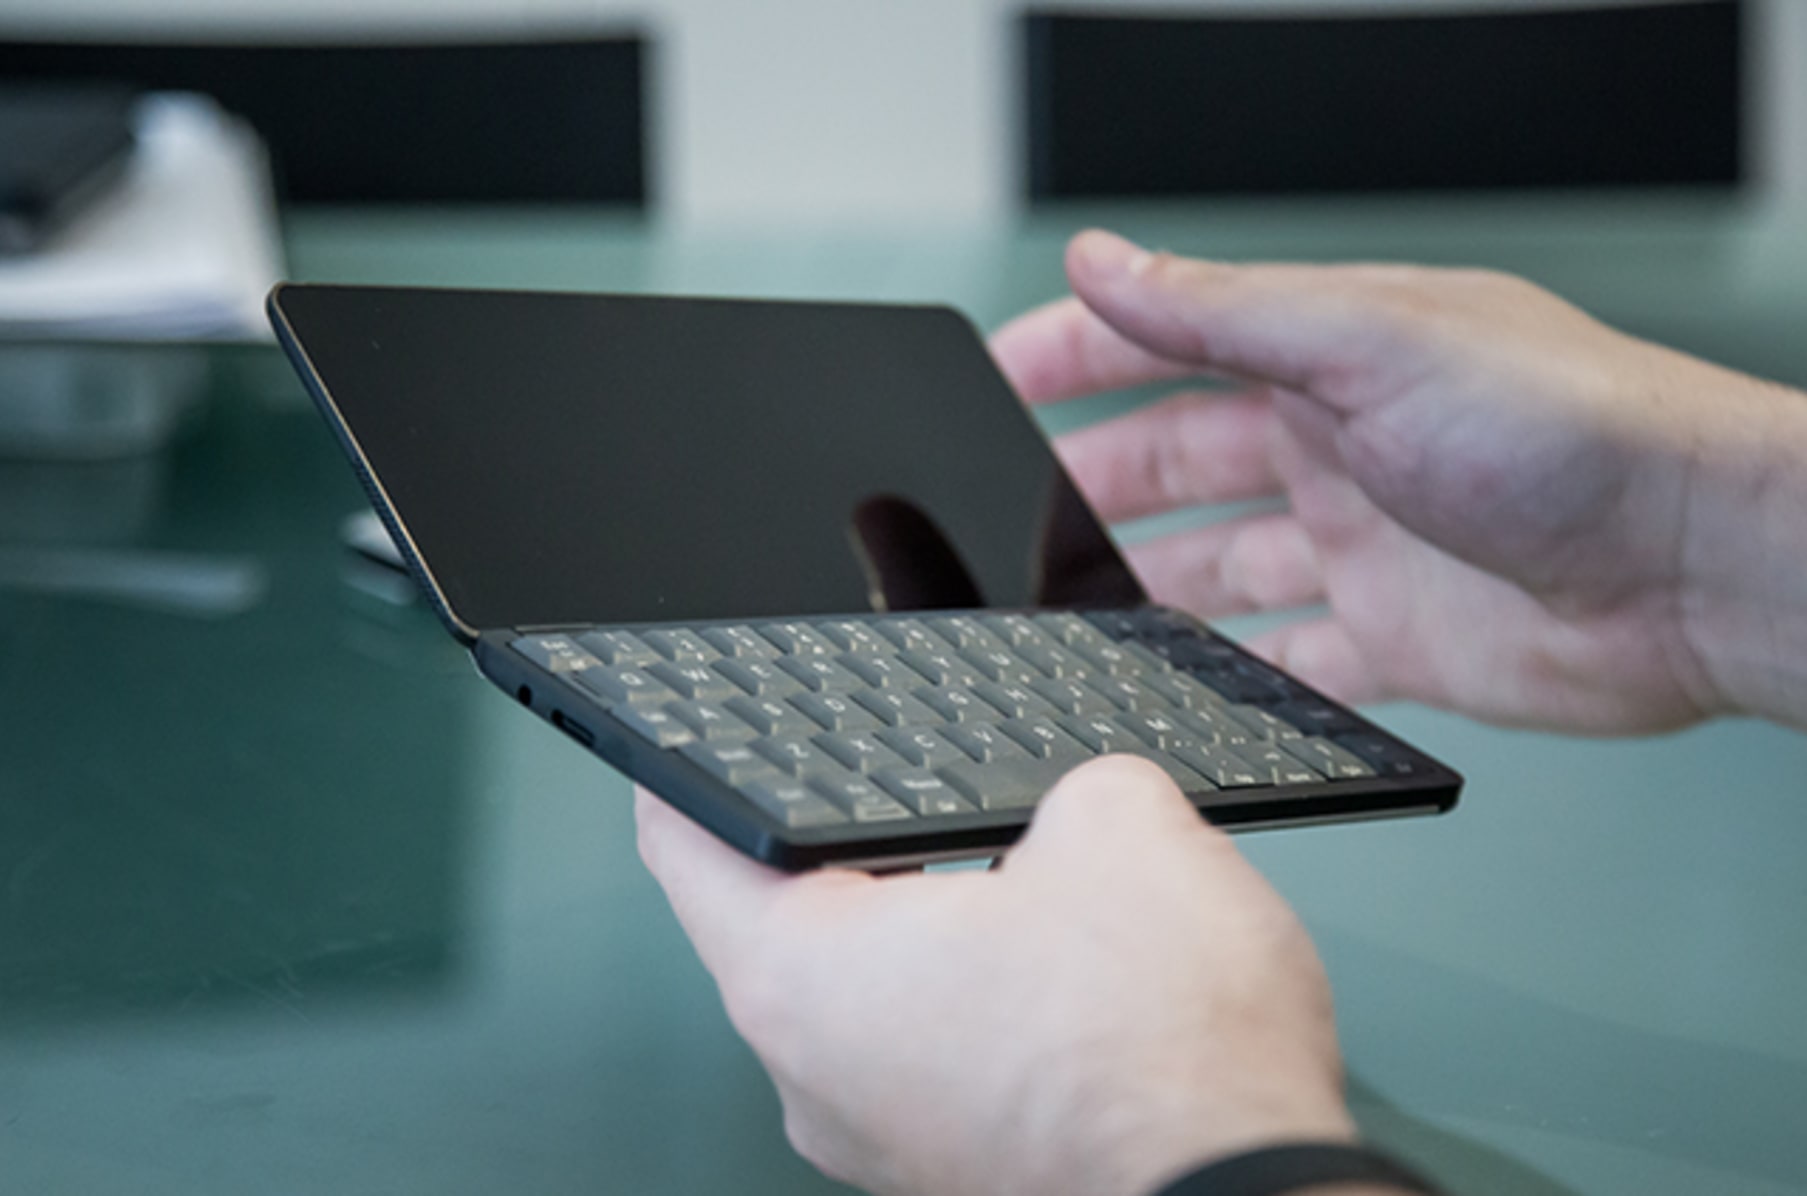 Gemini Pda Android Linux Keyboard Mobile Device Indiegogo